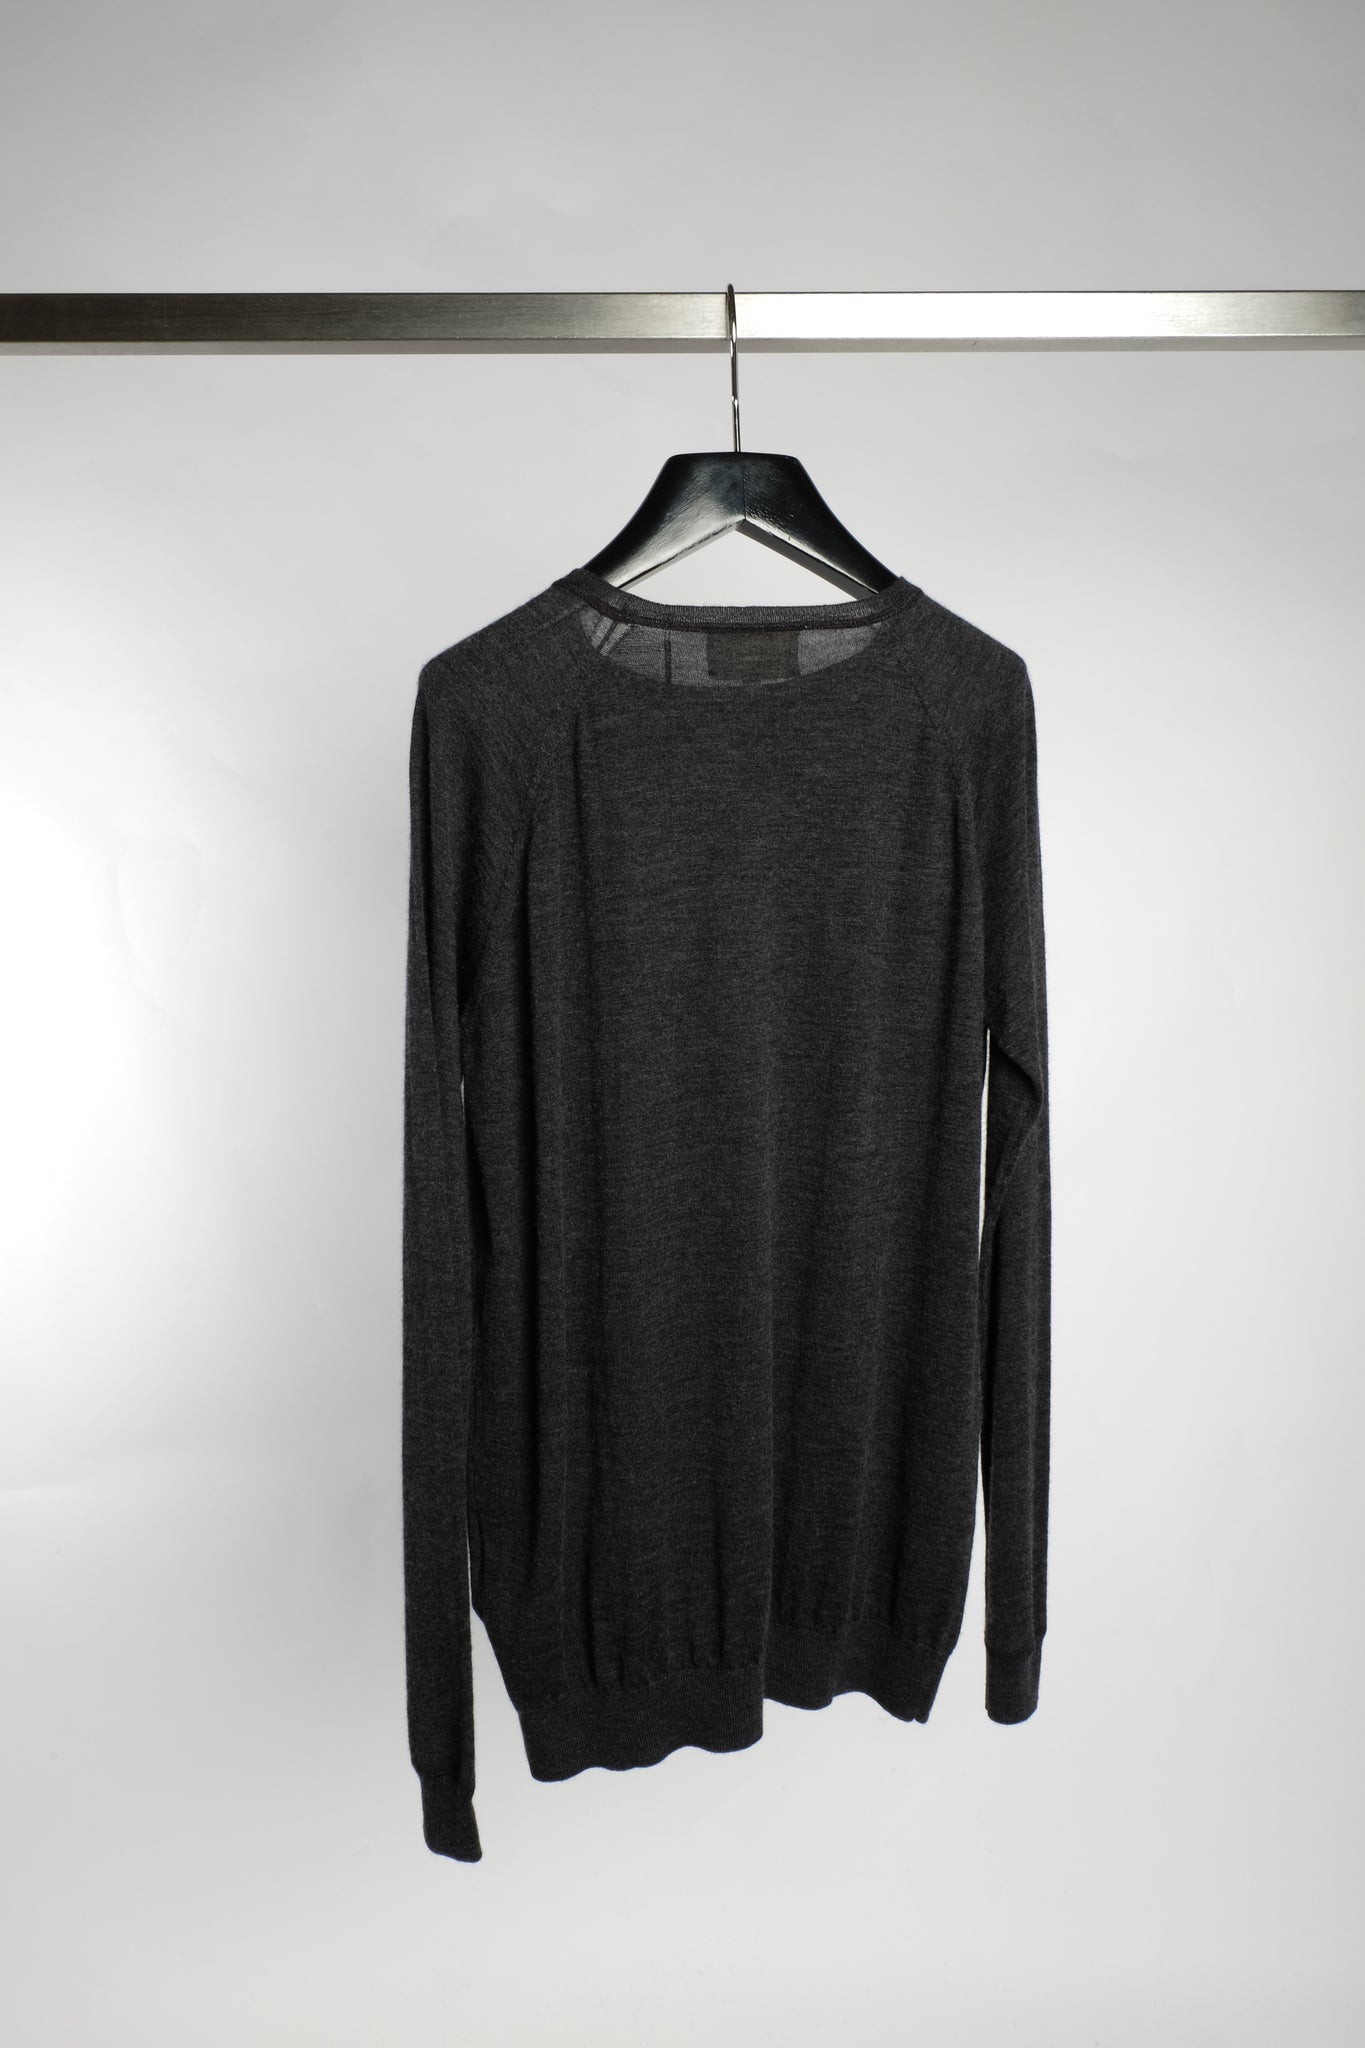 SUPER FINE WOOL CASHMERE KNITTED SWEATER BY LOULOU STUDIO